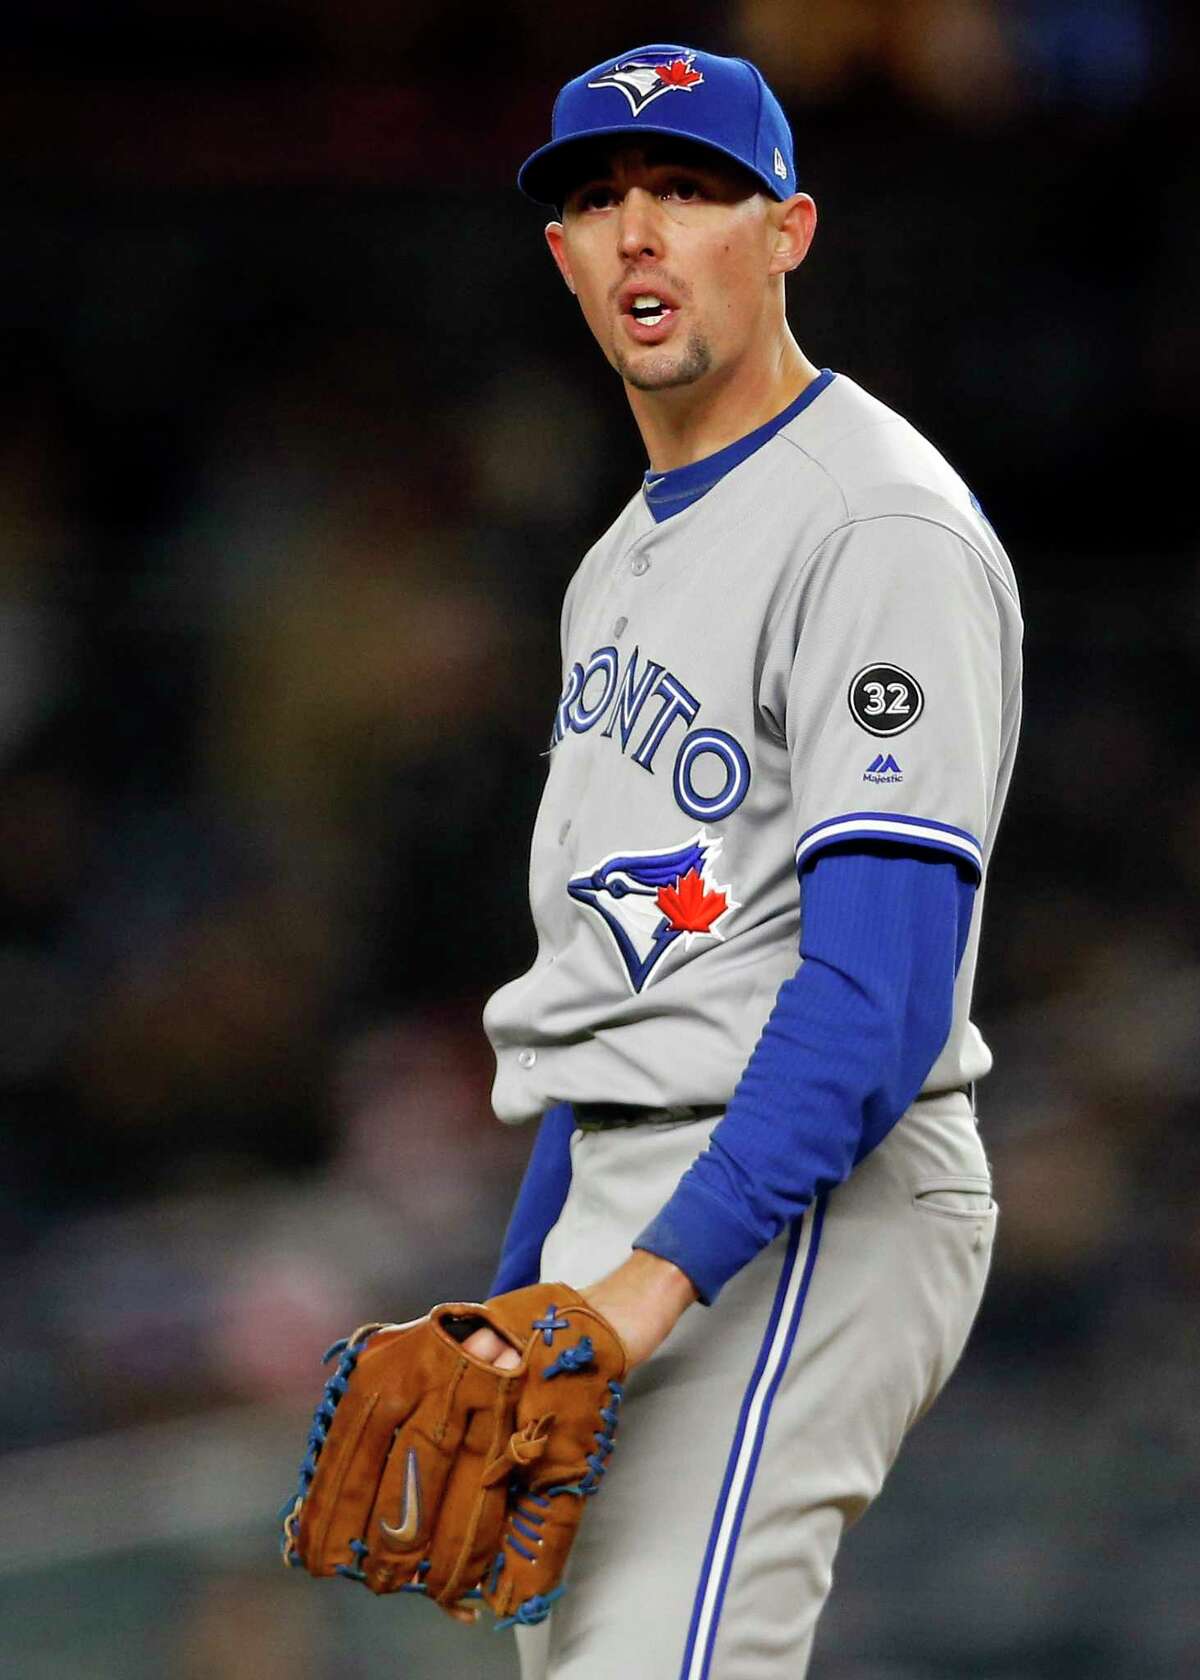 NEW YORK, NY - APRIL 19: Aaron Sanchez #41 of the Toronto Blue Jays reacts against the New York Yankees during the fifth inning at Yankee Stadium on April 19, 2018 in the Bronx borough of New York City. (Photo by Adam Hunger/Getty Images)